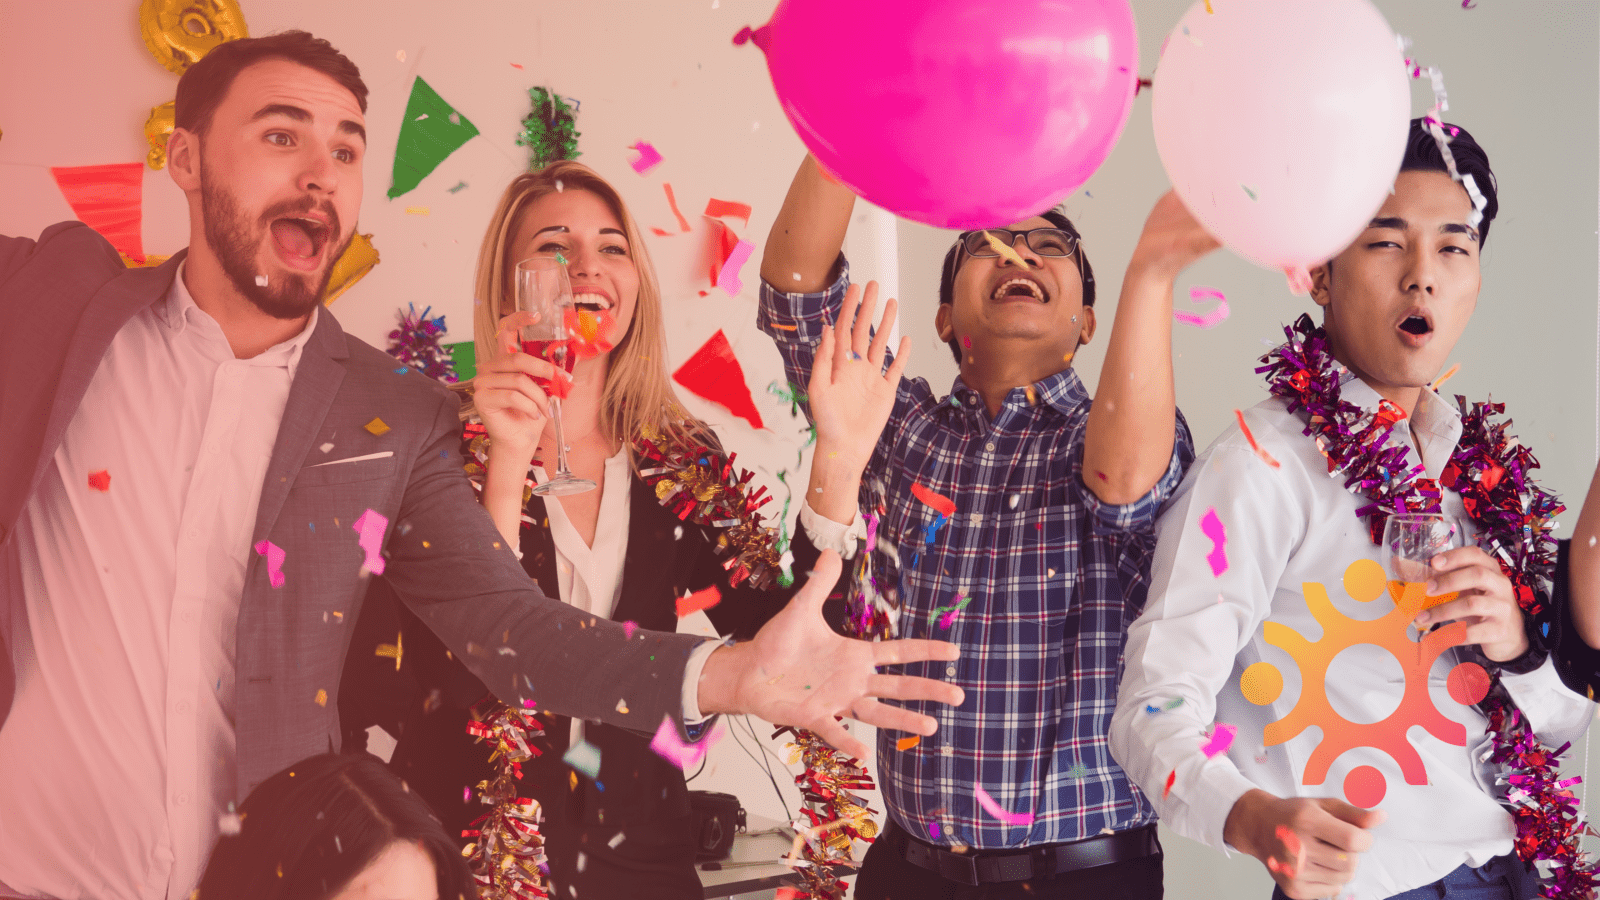 10 Tips to Throw a Great Holiday Party – WITHOUT Breaking Any Laws!